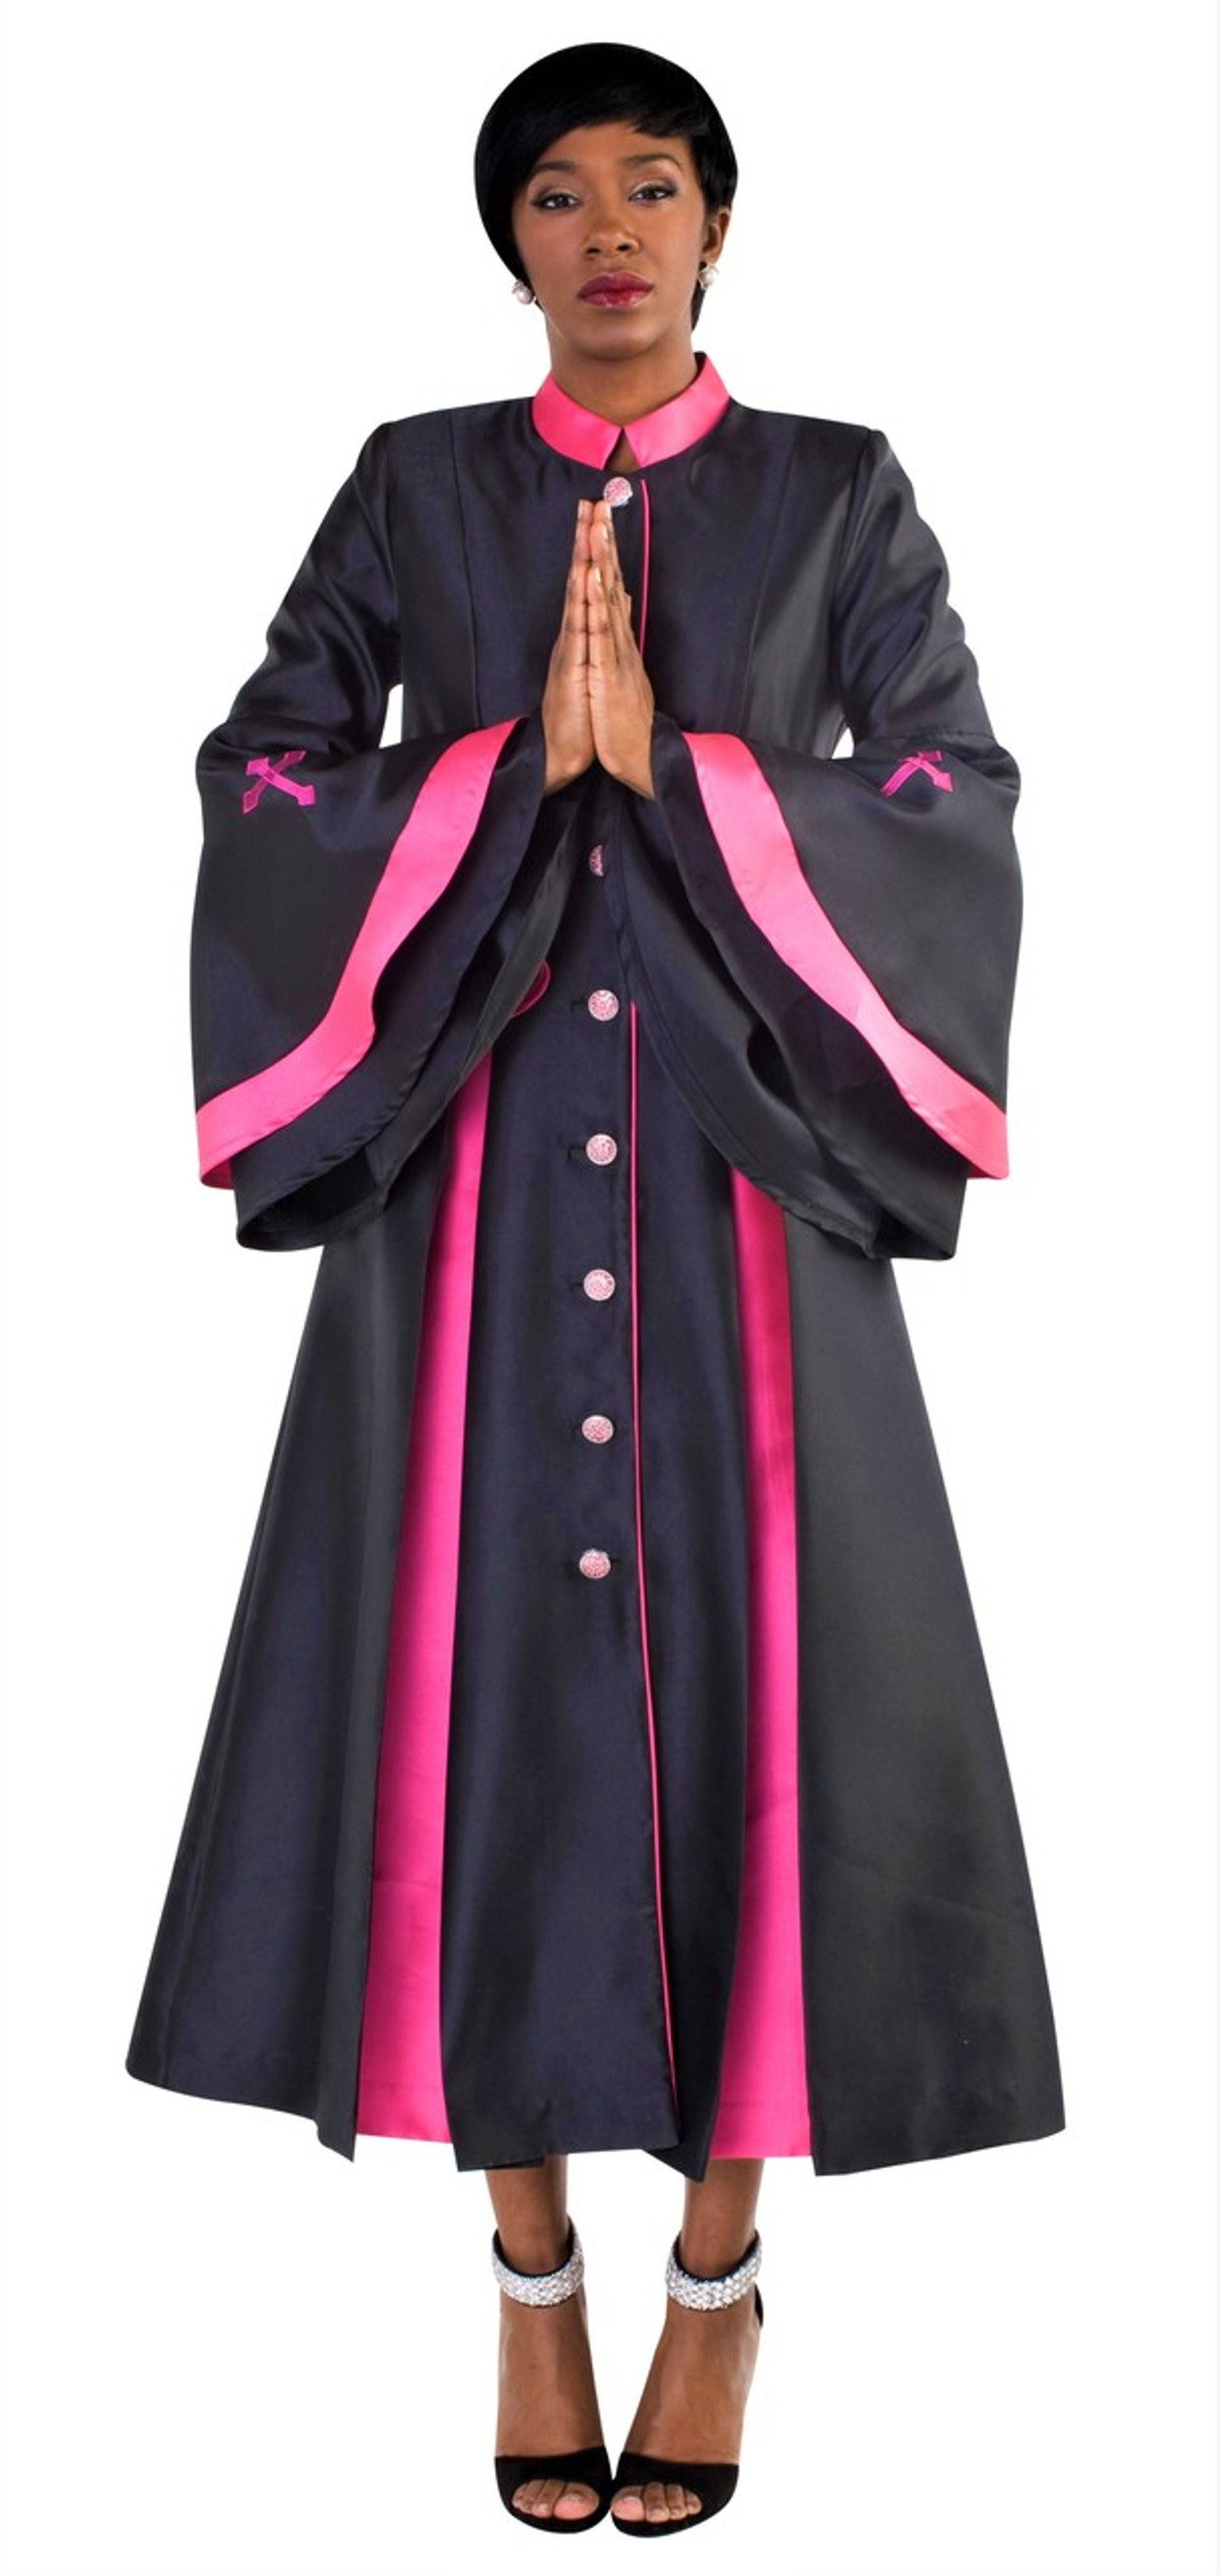 Clergy Robes For Women Female Clergy Dresses And Attire